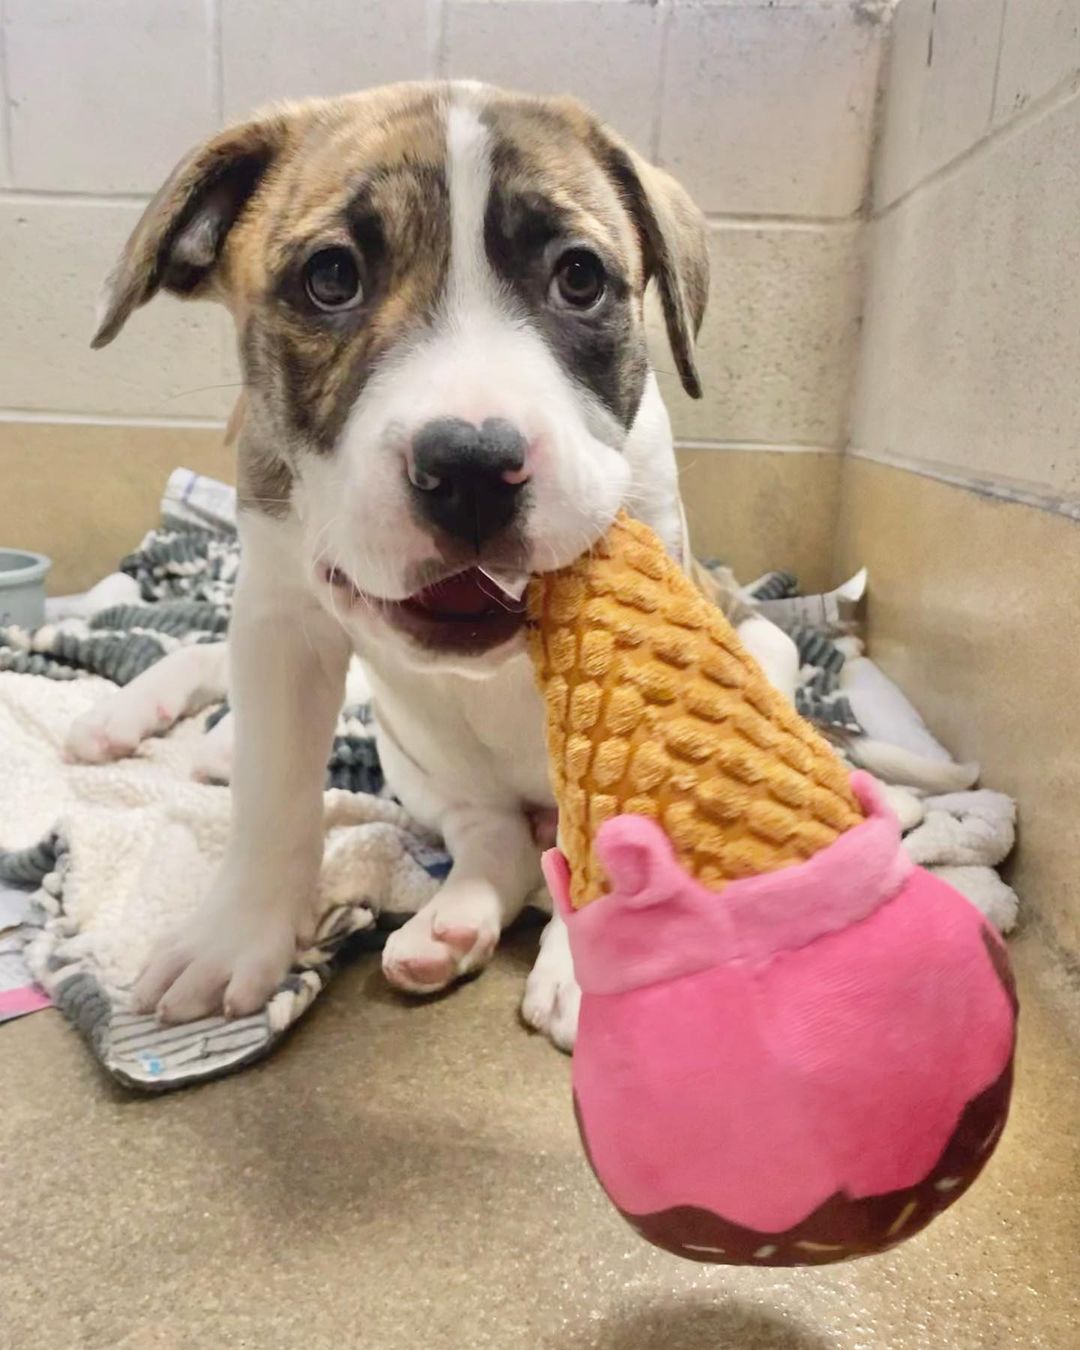 We don’t have the heart to tell Rumbo that’s not how you eat an ice cream cone 🤪 Could one of you guys break the news to him? <a target='_blank' href='https://www.instagram.com/explore/tags/rescuedogsrock/'>#rescuedogsrock</a>

<a target='_blank' href='https://www.instagram.com/explore/tags/spcawake/'>#spcawake</a> <a target='_blank' href='https://www.instagram.com/explore/tags/adoptme/'>#adoptme</a> <a target='_blank' href='https://www.instagram.com/explore/tags/adoptables/'>#adoptables</a> <a target='_blank' href='https://www.instagram.com/explore/tags/raleigh/'>#raleigh</a> <a target='_blank' href='https://www.instagram.com/explore/tags/wakecounty/'>#wakecounty</a> <a target='_blank' href='https://www.instagram.com/explore/tags/animalrescue/'>#animalrescue</a> <a target='_blank' href='https://www.instagram.com/explore/tags/adoptdontshop/'>#adoptdontshop</a> <a target='_blank' href='https://www.instagram.com/explore/tags/adoptashelterpet/'>#adoptashelterpet</a>  <a target='_blank' href='https://www.instagram.com/explore/tags/puppiesforadoption/'>#puppiesforadoption</a> <a target='_blank' href='https://www.instagram.com/explore/tags/animalshelter/'>#animalshelter</a> <a target='_blank' href='https://www.instagram.com/explore/tags/adoptabledogsofinstagram/'>#adoptabledogsofinstagram</a> <a target='_blank' href='https://www.instagram.com/explore/tags/spca/'>#spca</a>